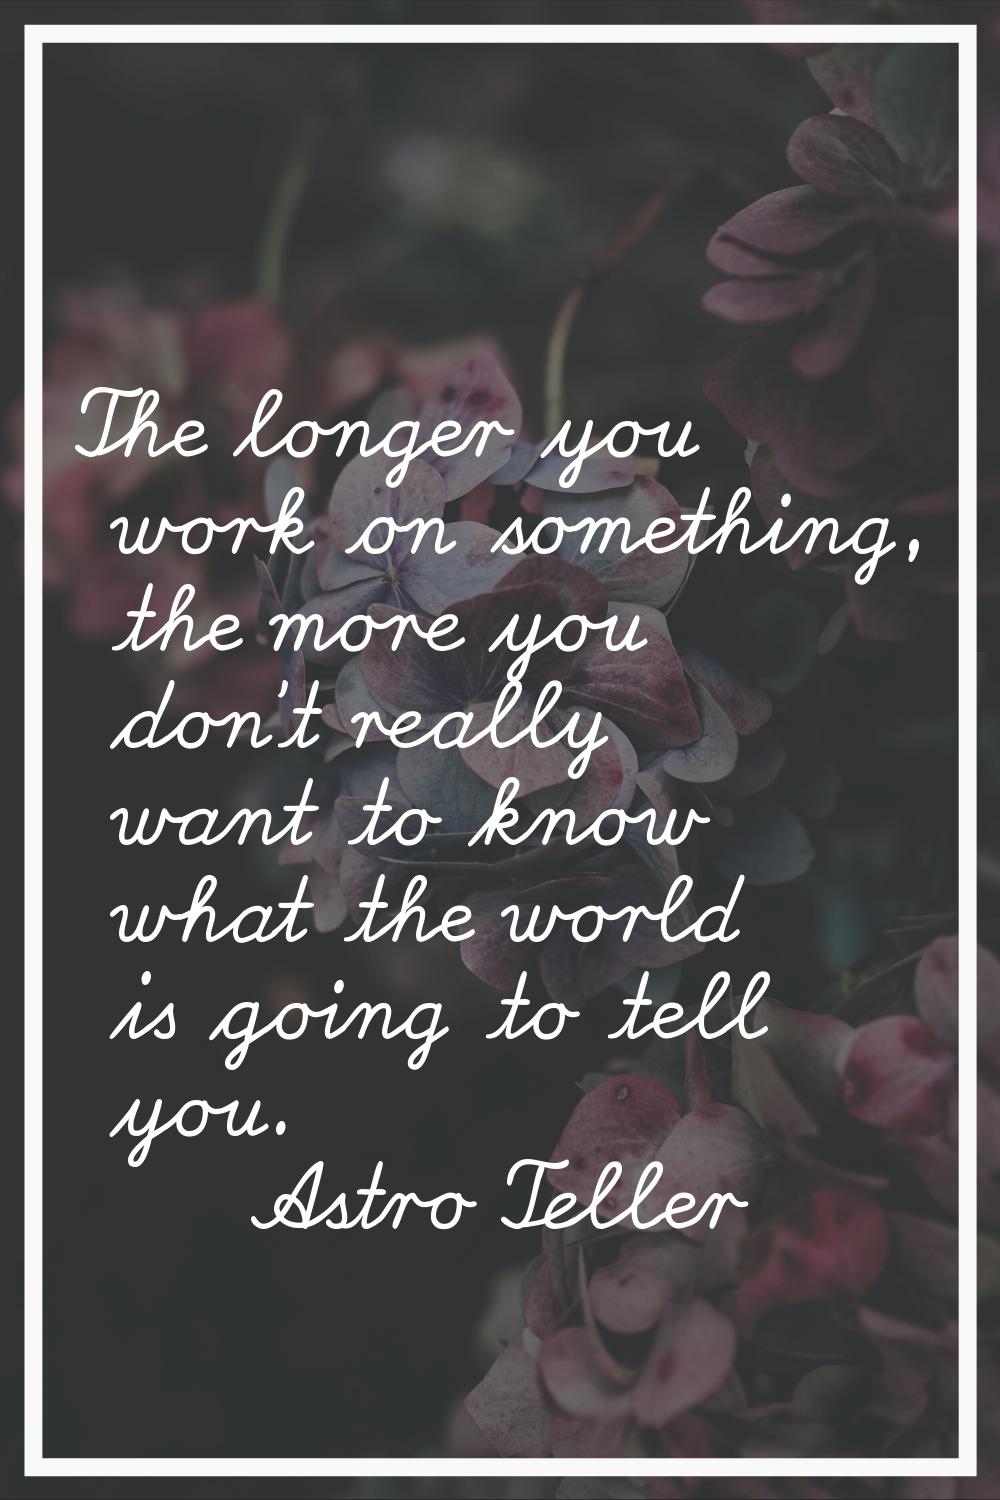 The longer you work on something, the more you don't really want to know what the world is going to